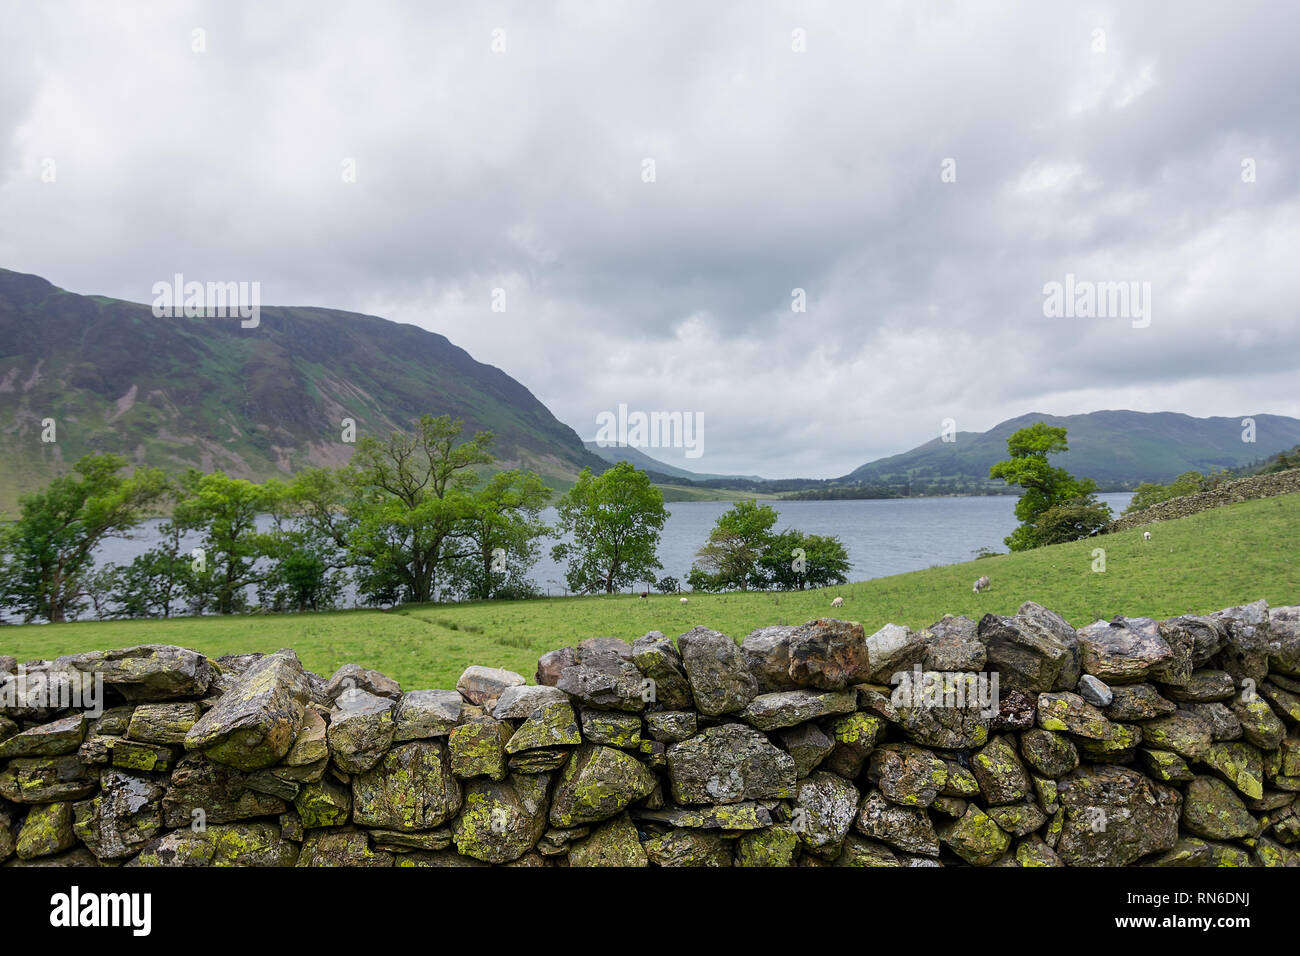 A dry stone wall of Lake District stone with back drop of trees, lake and hills of Cumbria, England. Stock Photo